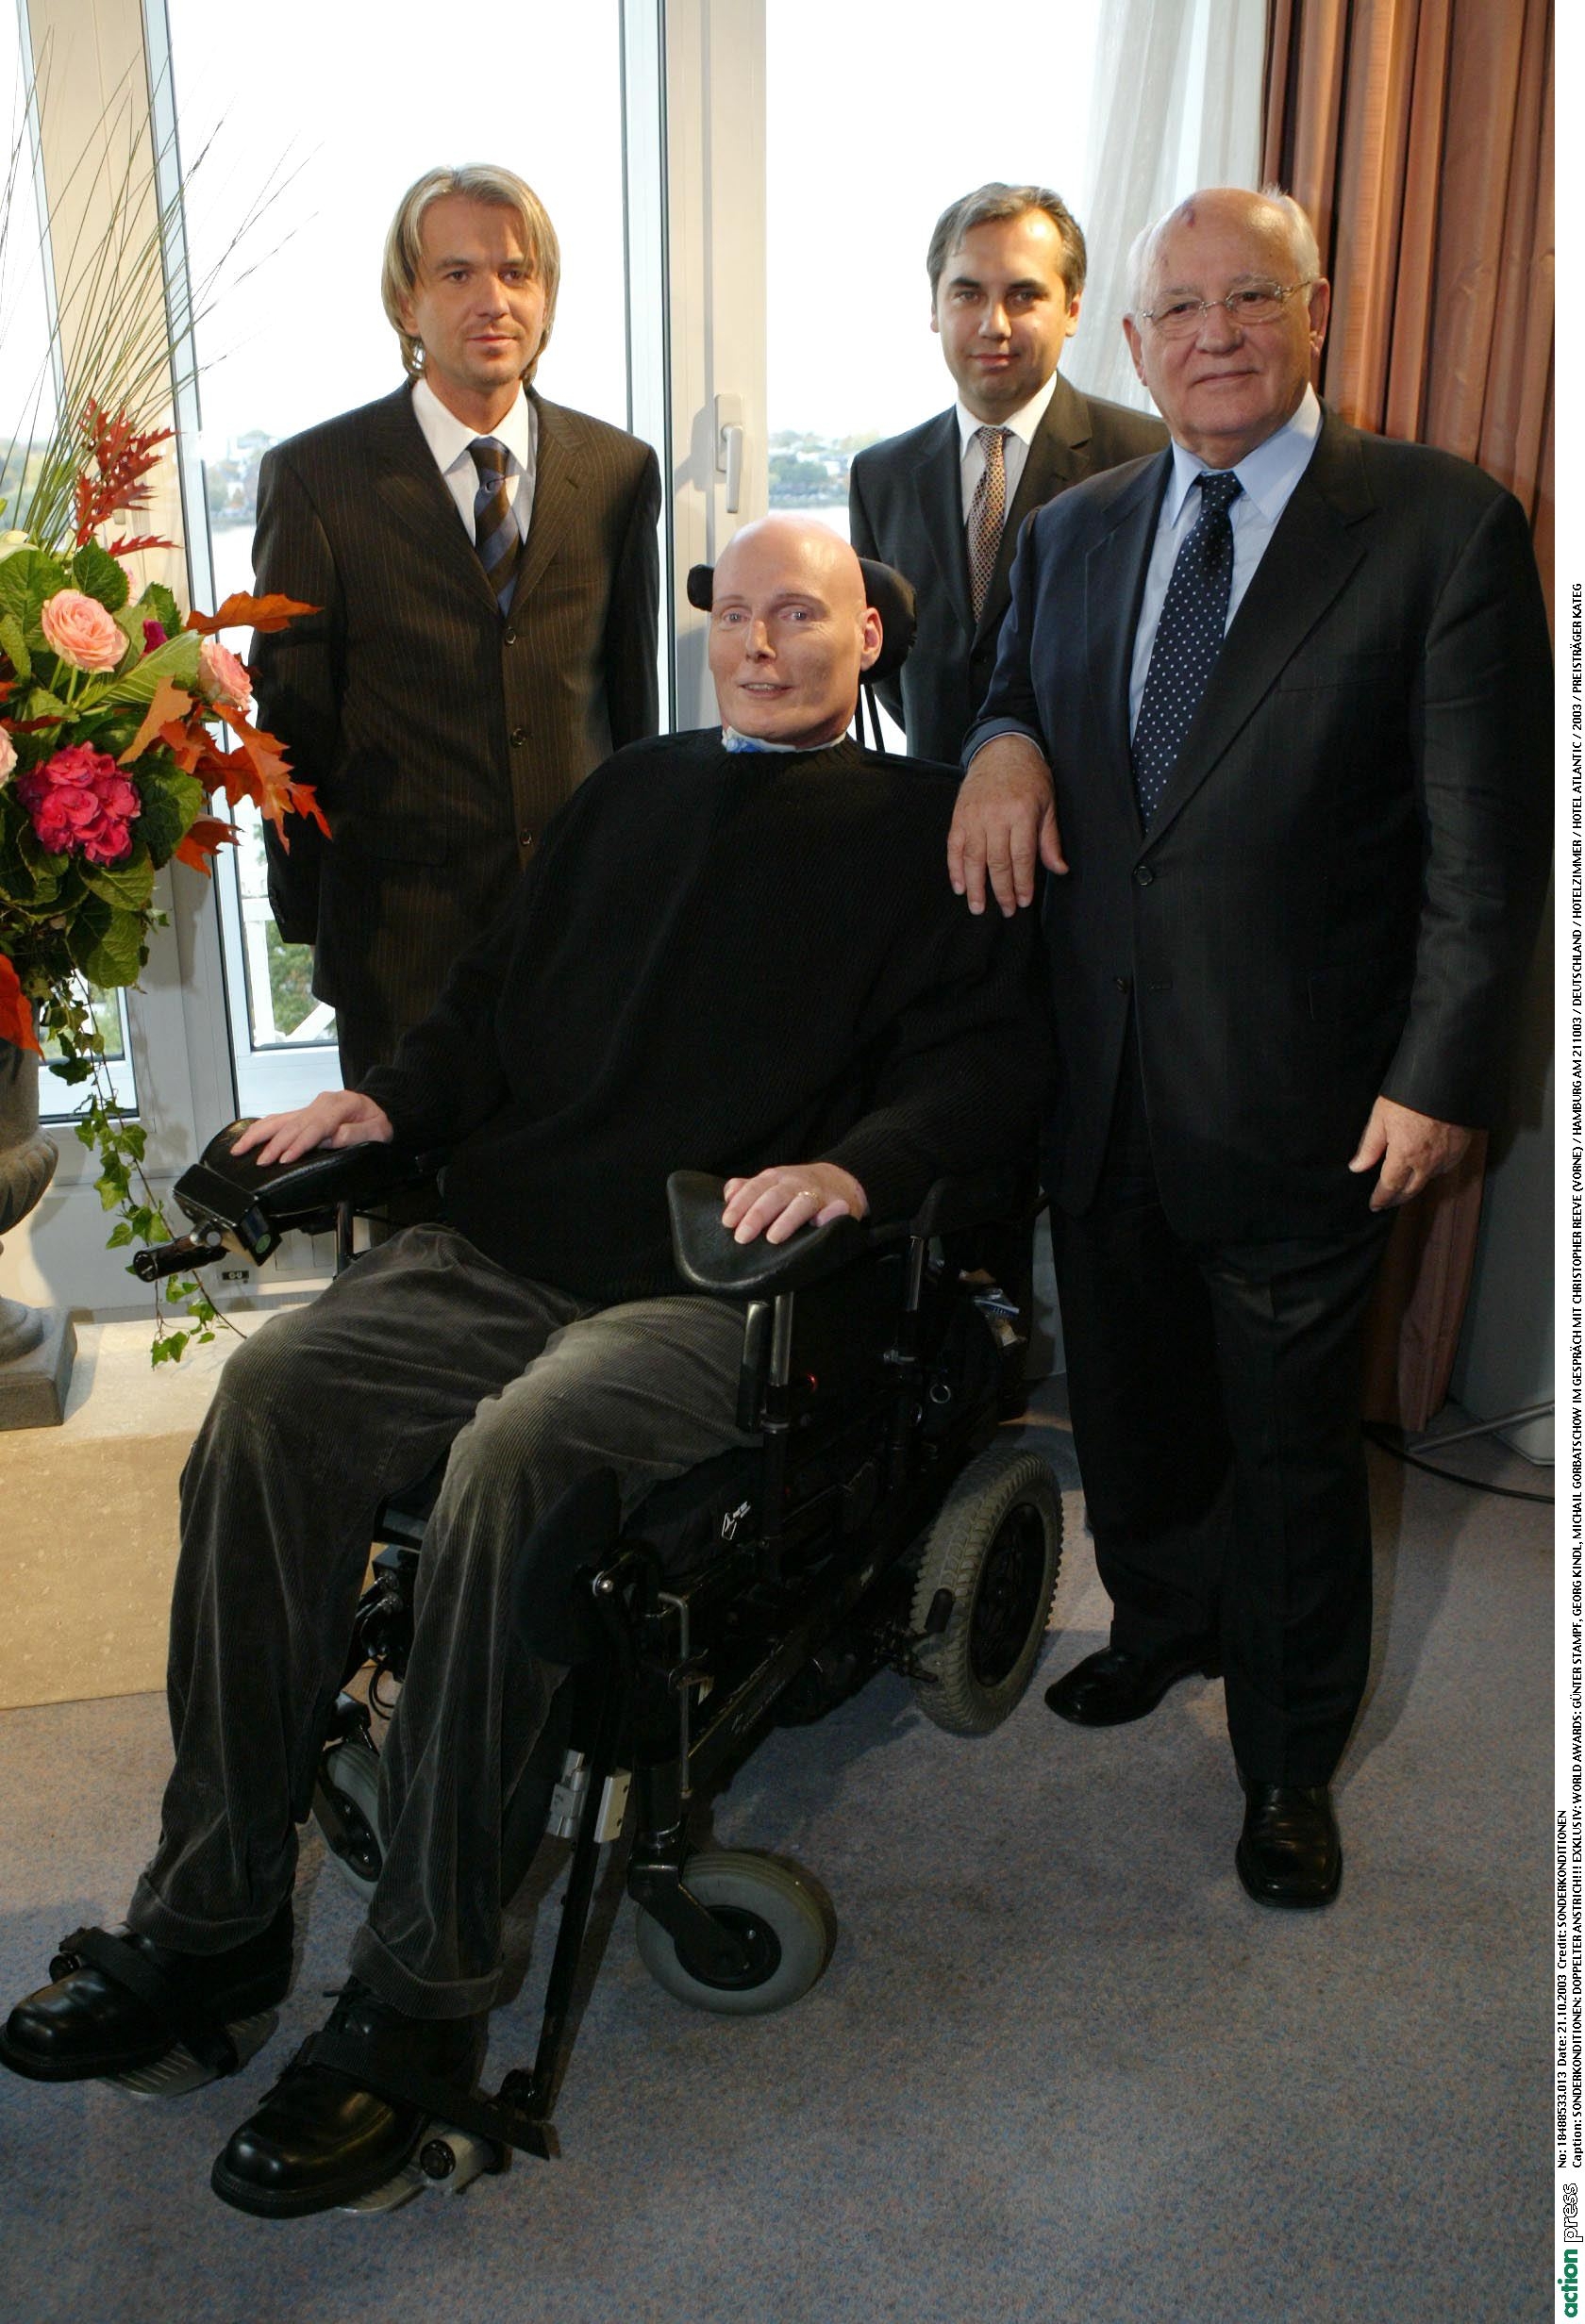 Christopher Reeve with Guenter Stampf, Georg Kindel and Mikhail Gorbachev